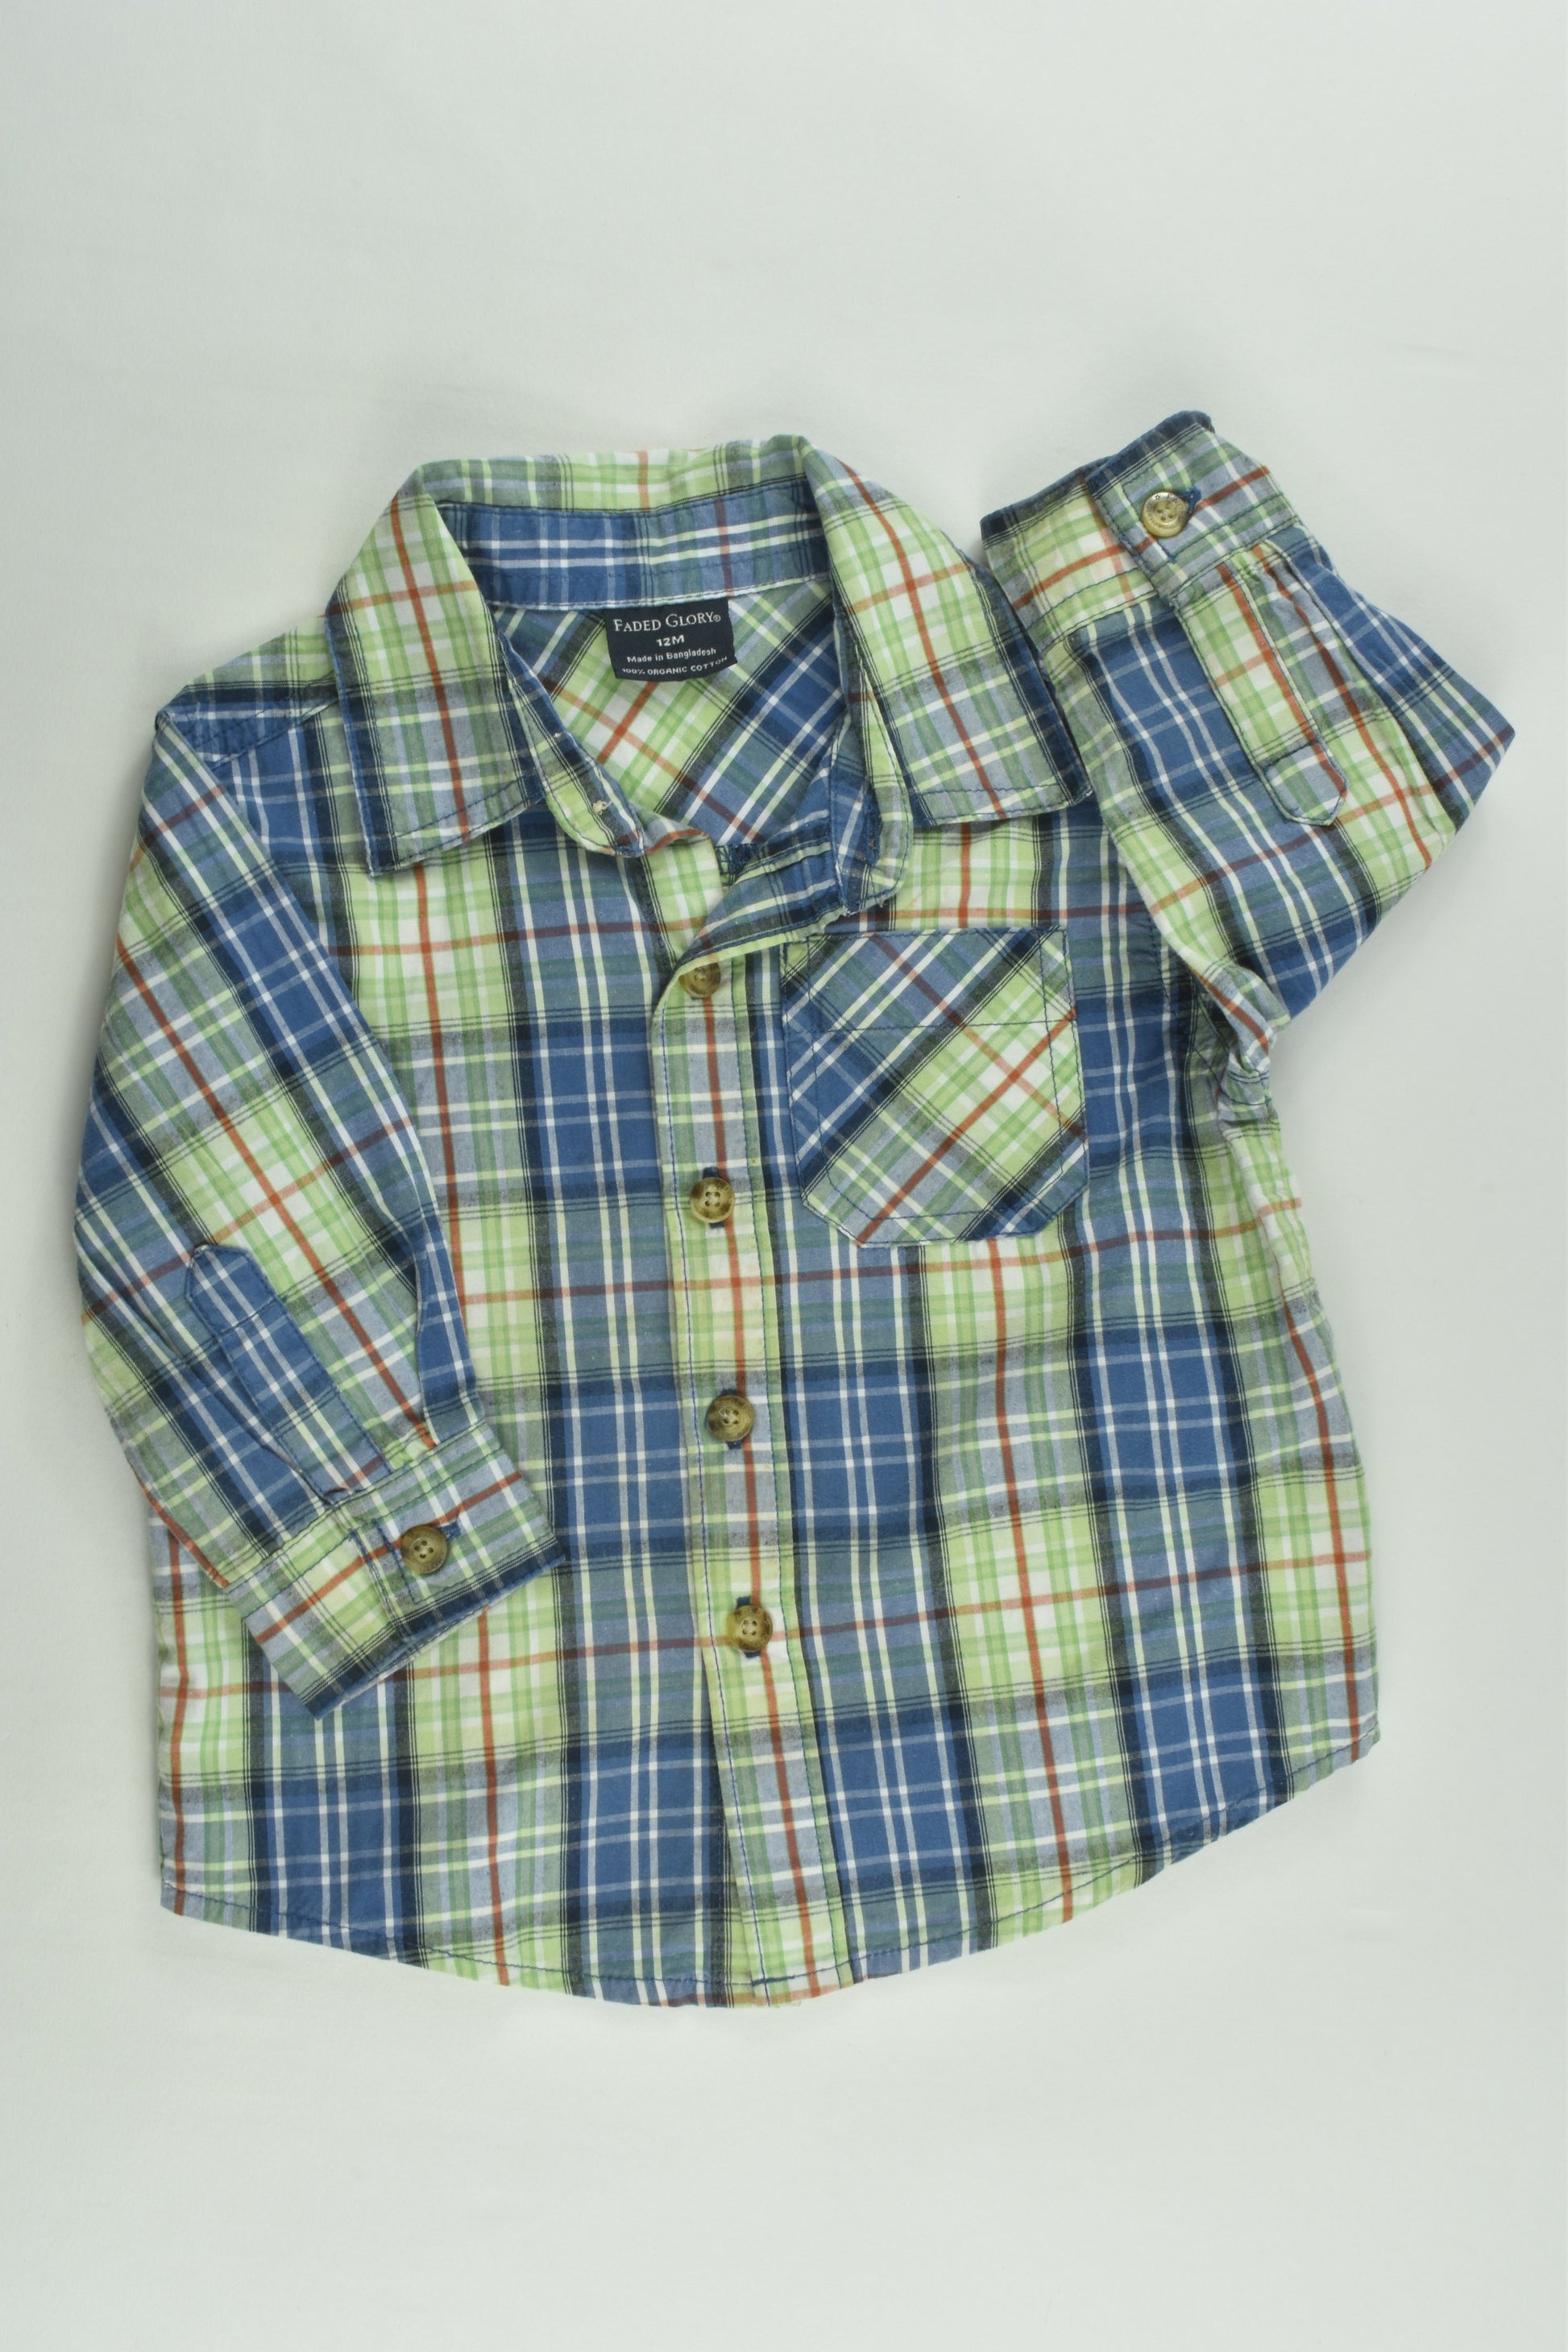 Faded Glory Size 0 (12 months) Organic Checked Shirt